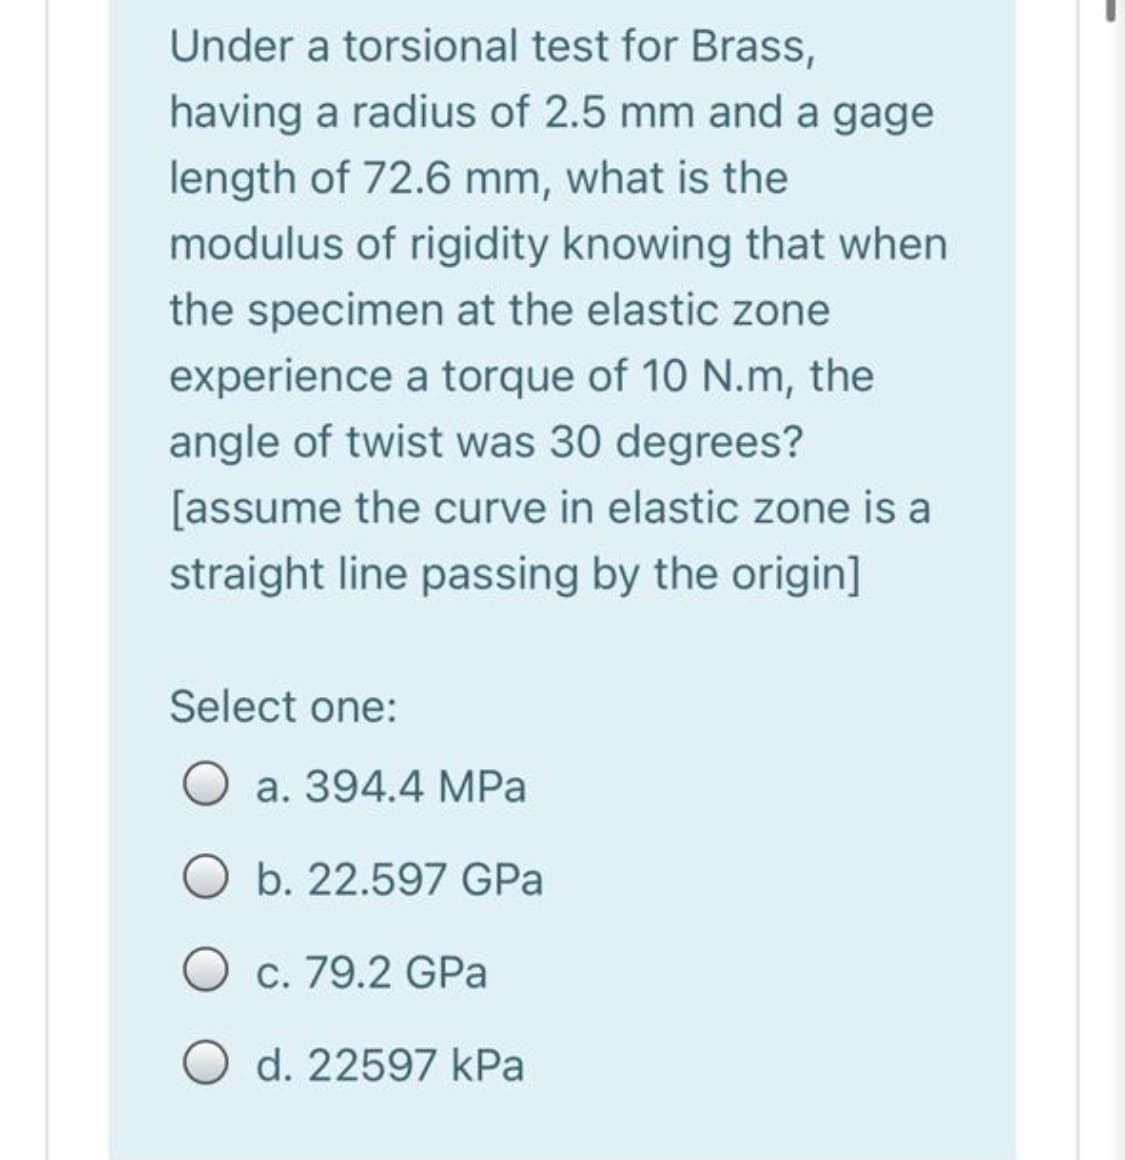 Under a torsional test for Brass,
having a radius of 2.5 mm and a gage
length of 72.6 mm, what is the
modulus of rigidity knowing that when
the specimen at the elastic zone
experience a torque of 10 N.m, the
angle of twist was 30 degrees?
[assume the curve in elastic zone is a
straight line passing by the origin]
Select one:
a. 394.4 MPa
b. 22.597 GPa
c. 79.2 GPa
O d. 22597 kPa
